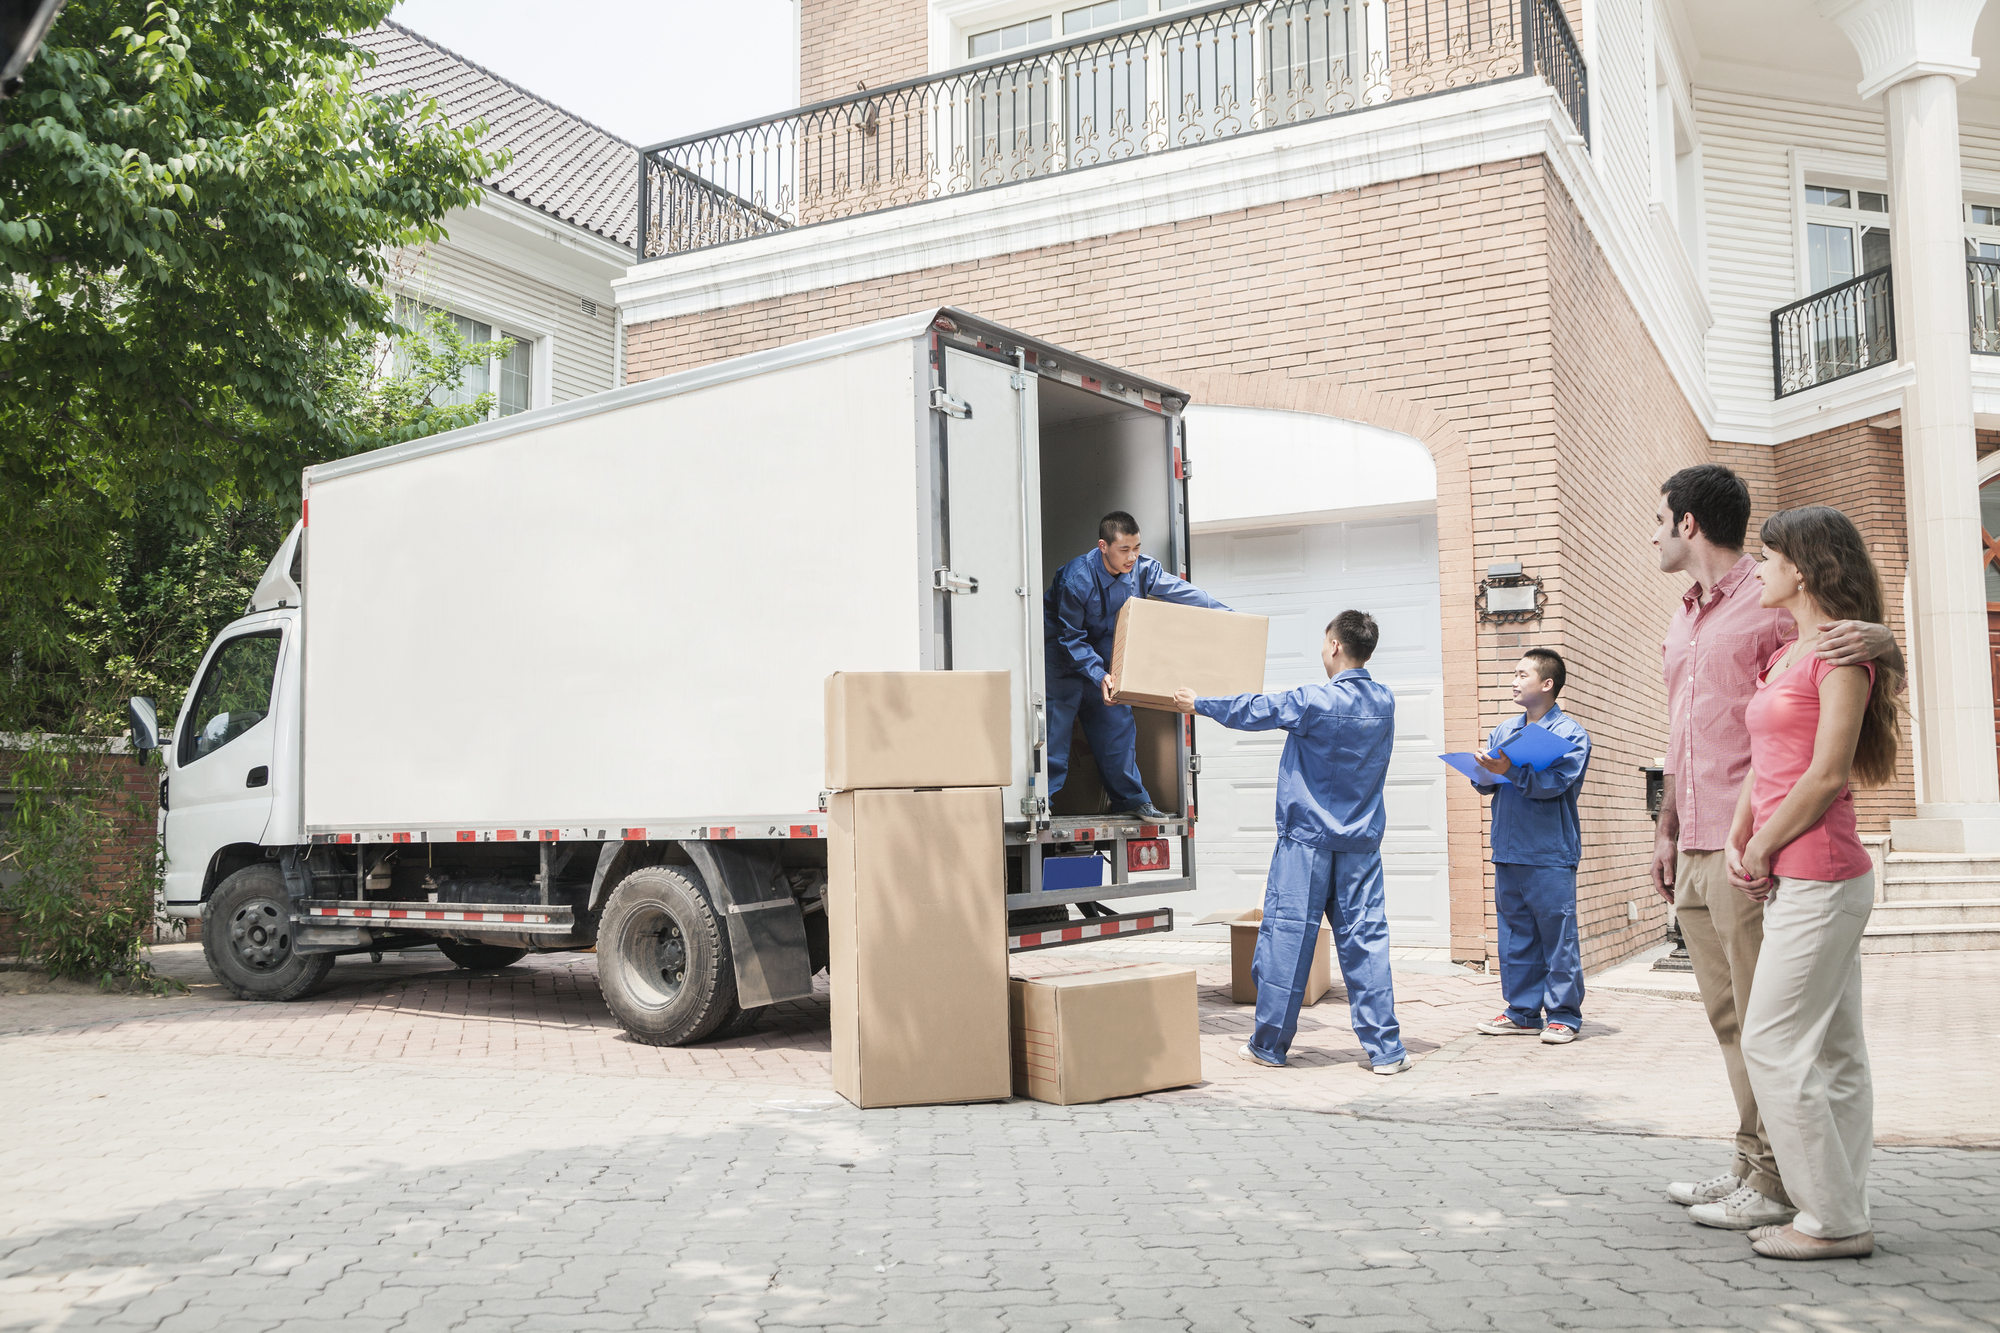 Movers unloading a truck